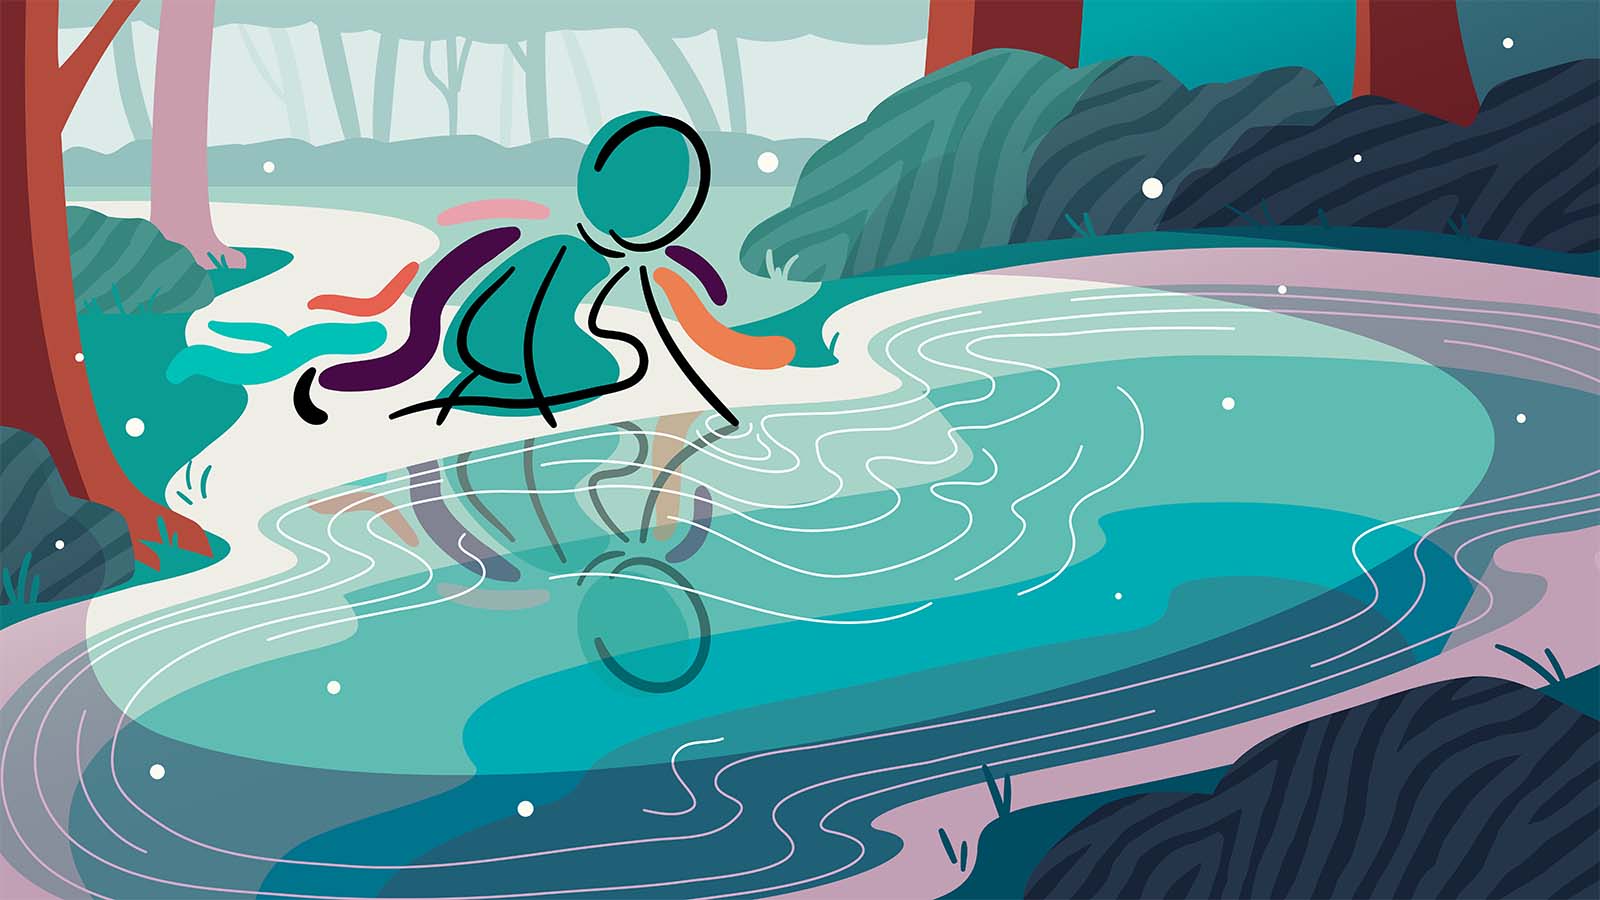 A figure looking into a pond, symbolizing the rare disease odyssey.